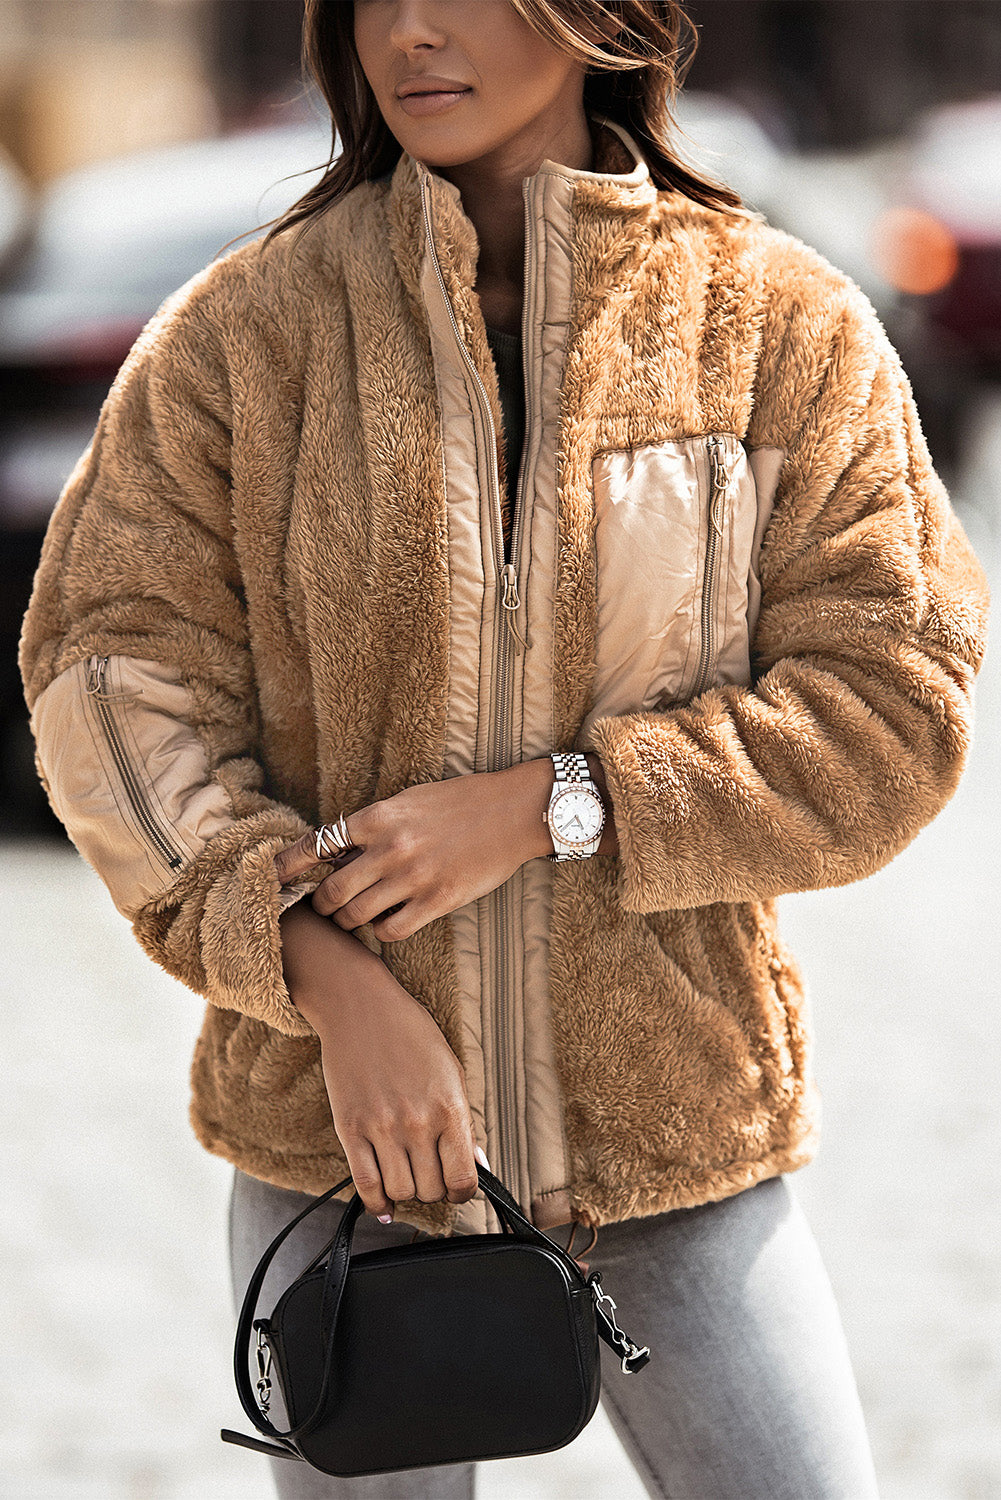 Zip Up Sherpa Coat with Pocket